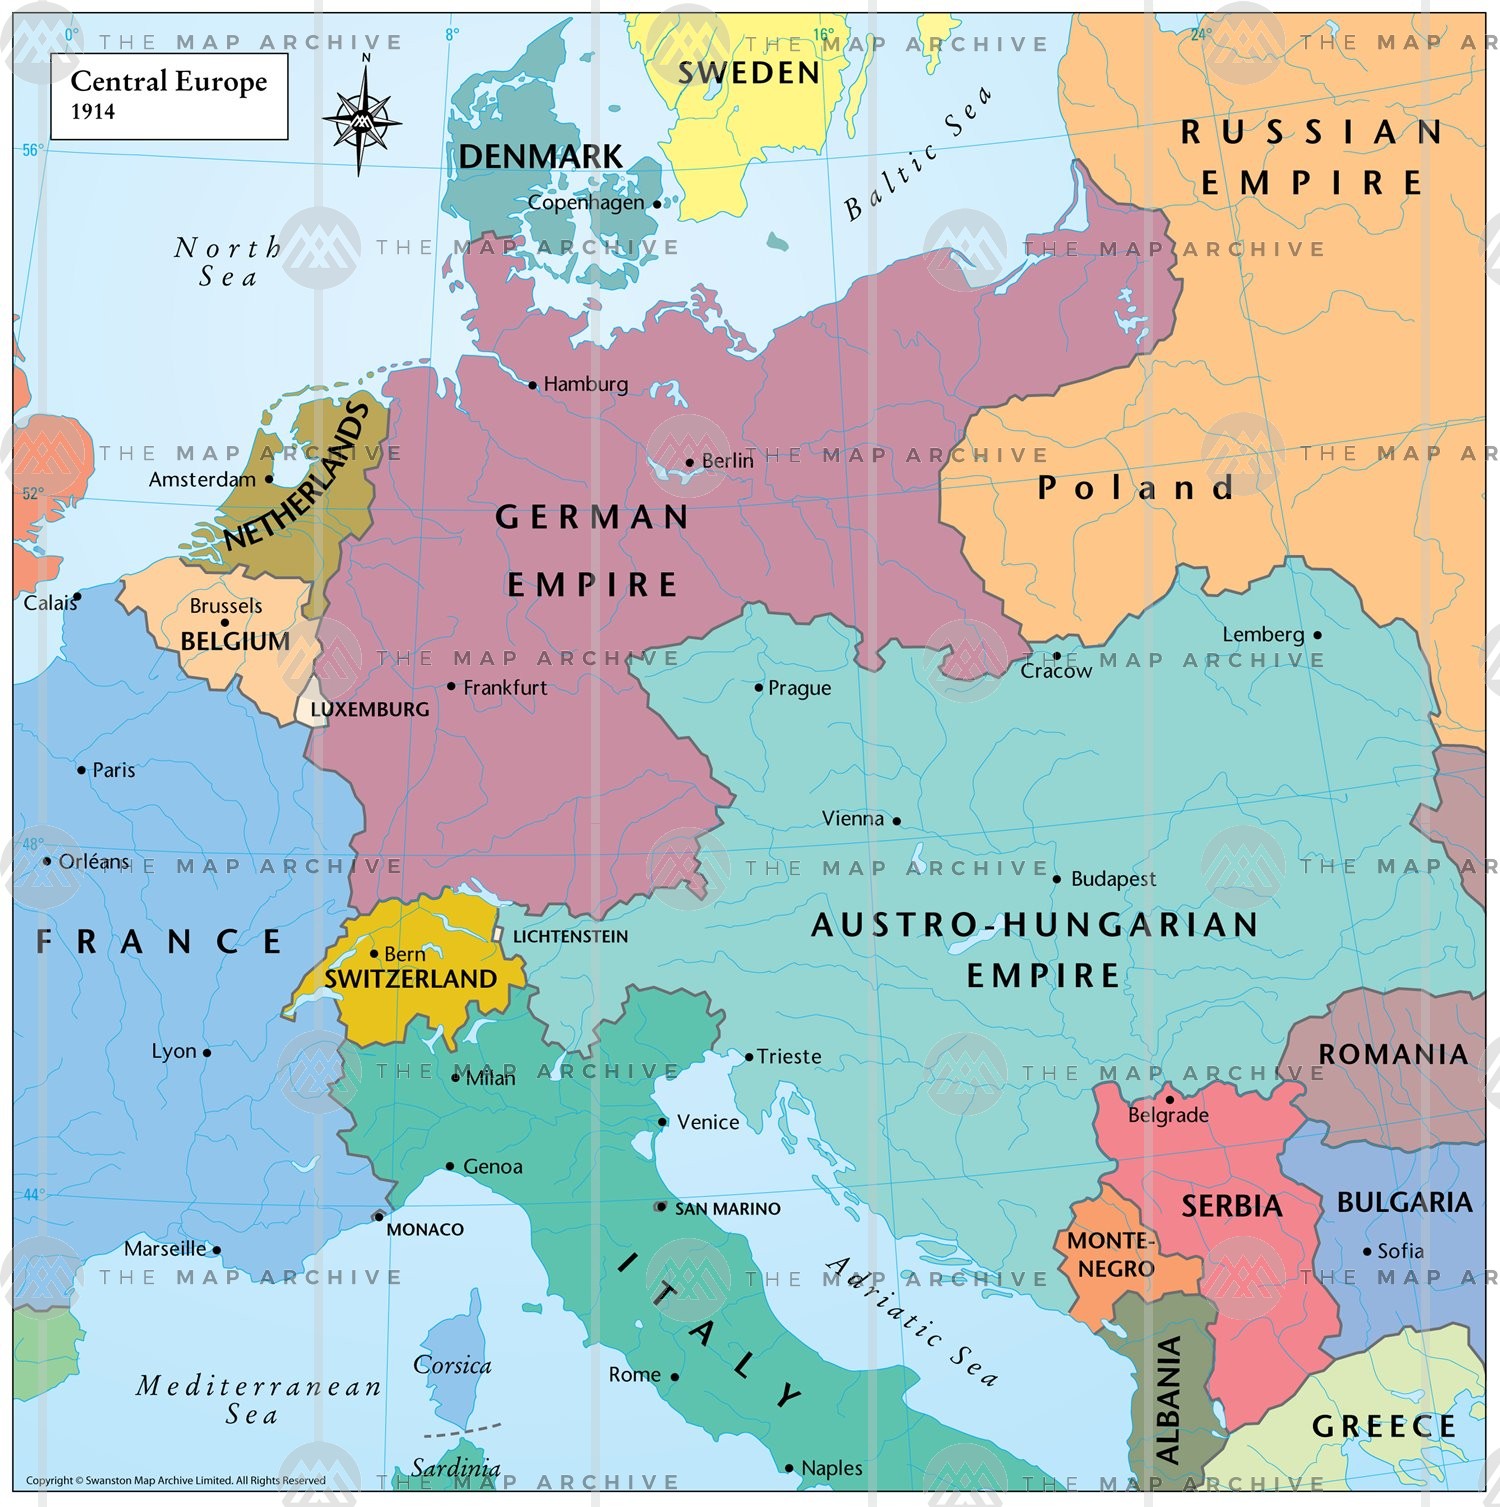 Central Europe 1914